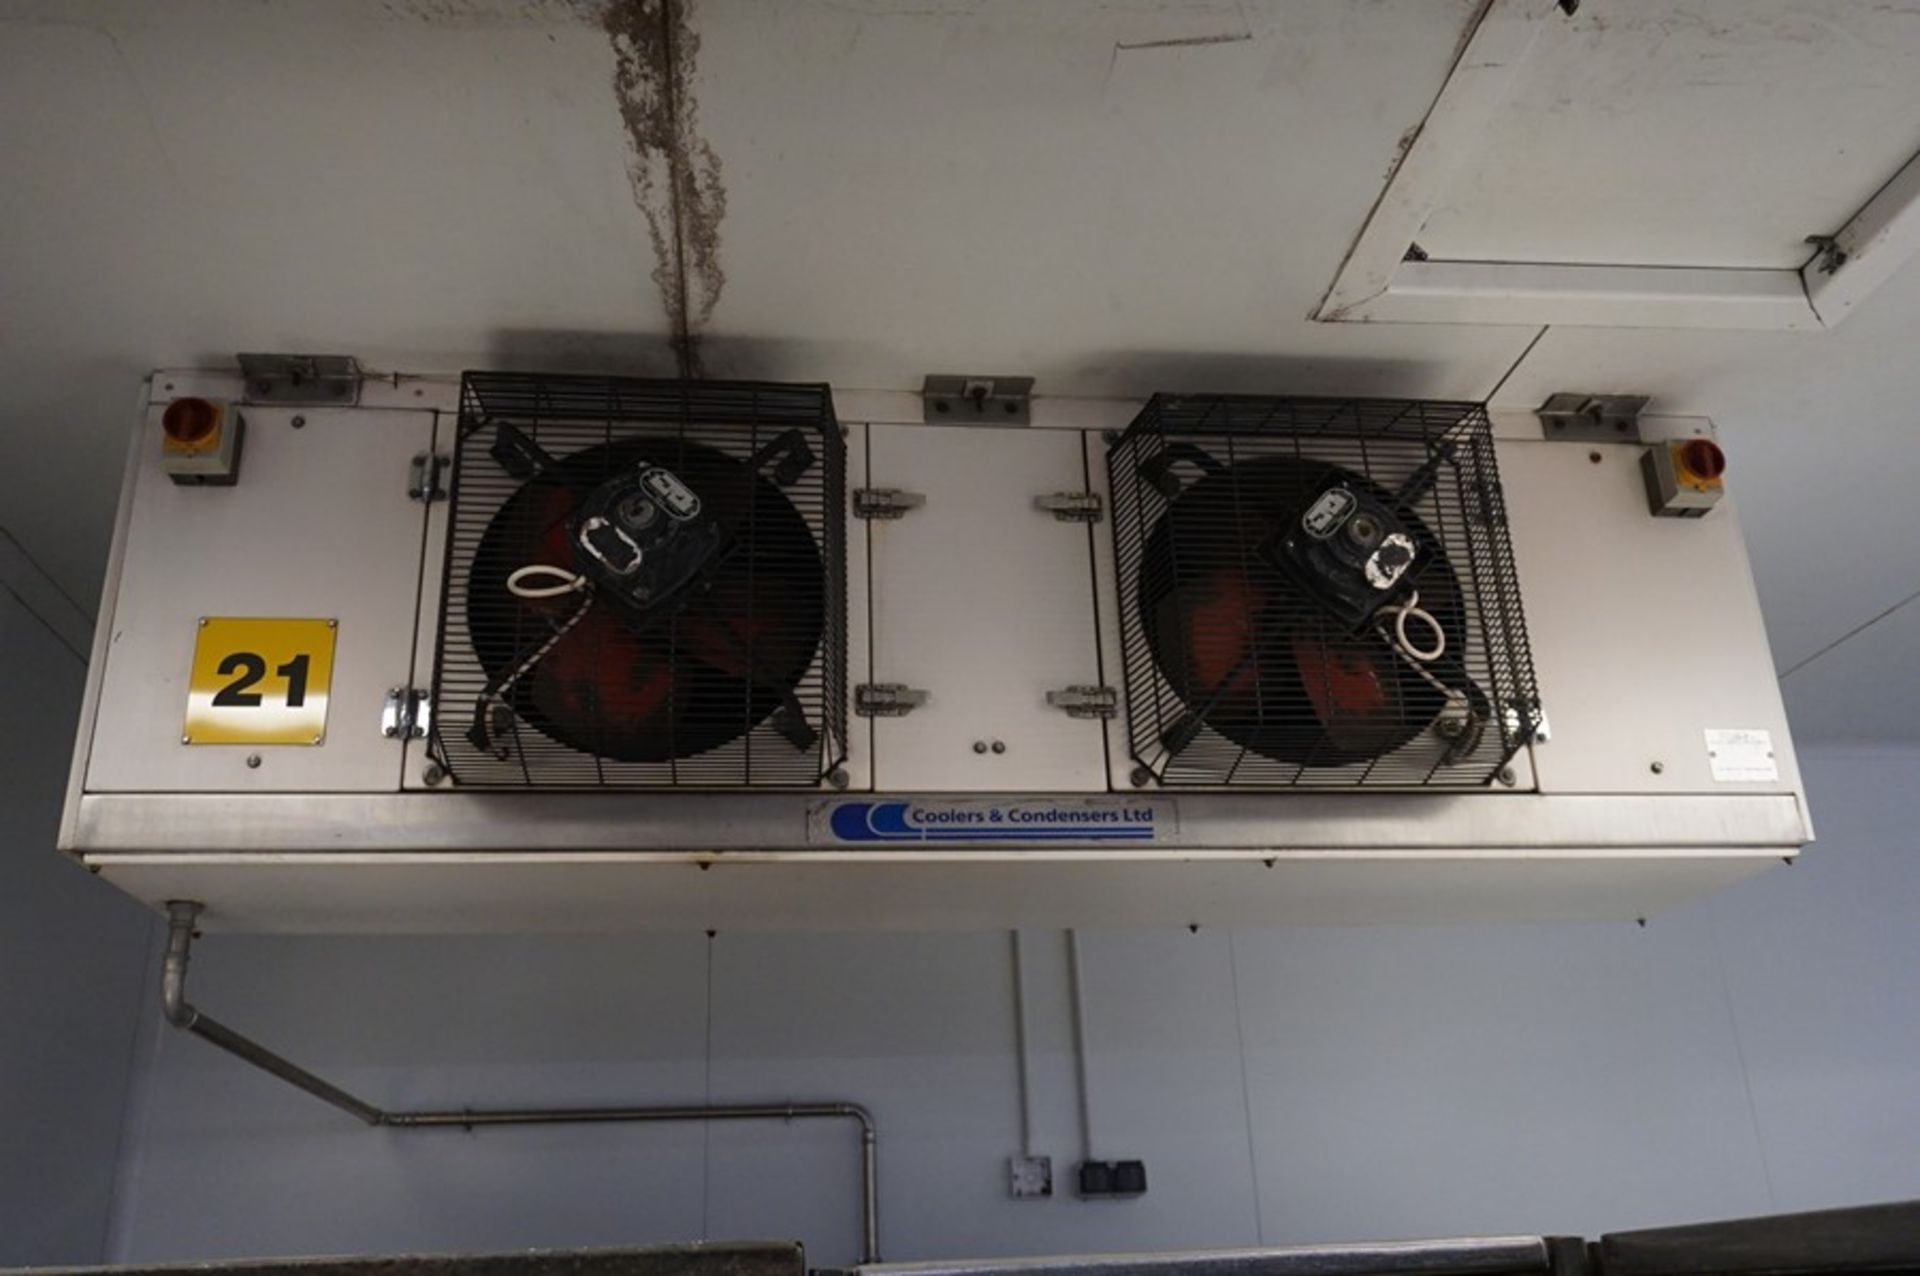 Coolers & Condensers, Model: CA10, twin fan chiller unit, Serial No. 9104104 (1991) (Lift out charge